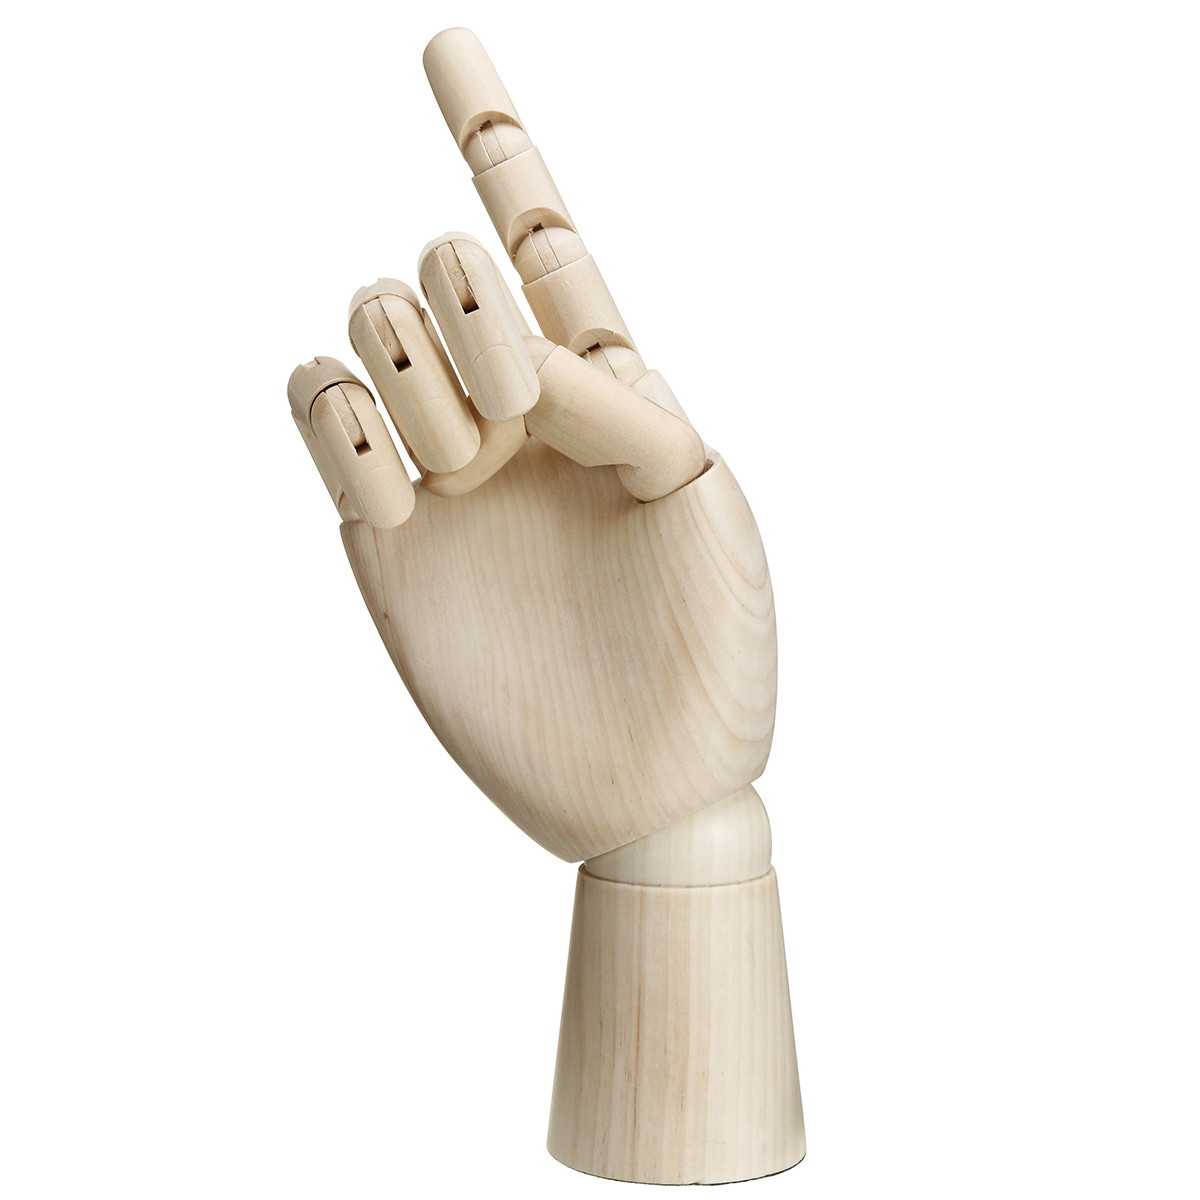 781012-Inch-Wooden-Hand-Body-Artist-Medical-Model-Flexible-Jointed-Wood-Sculpture-DIY-Education-1322443-9